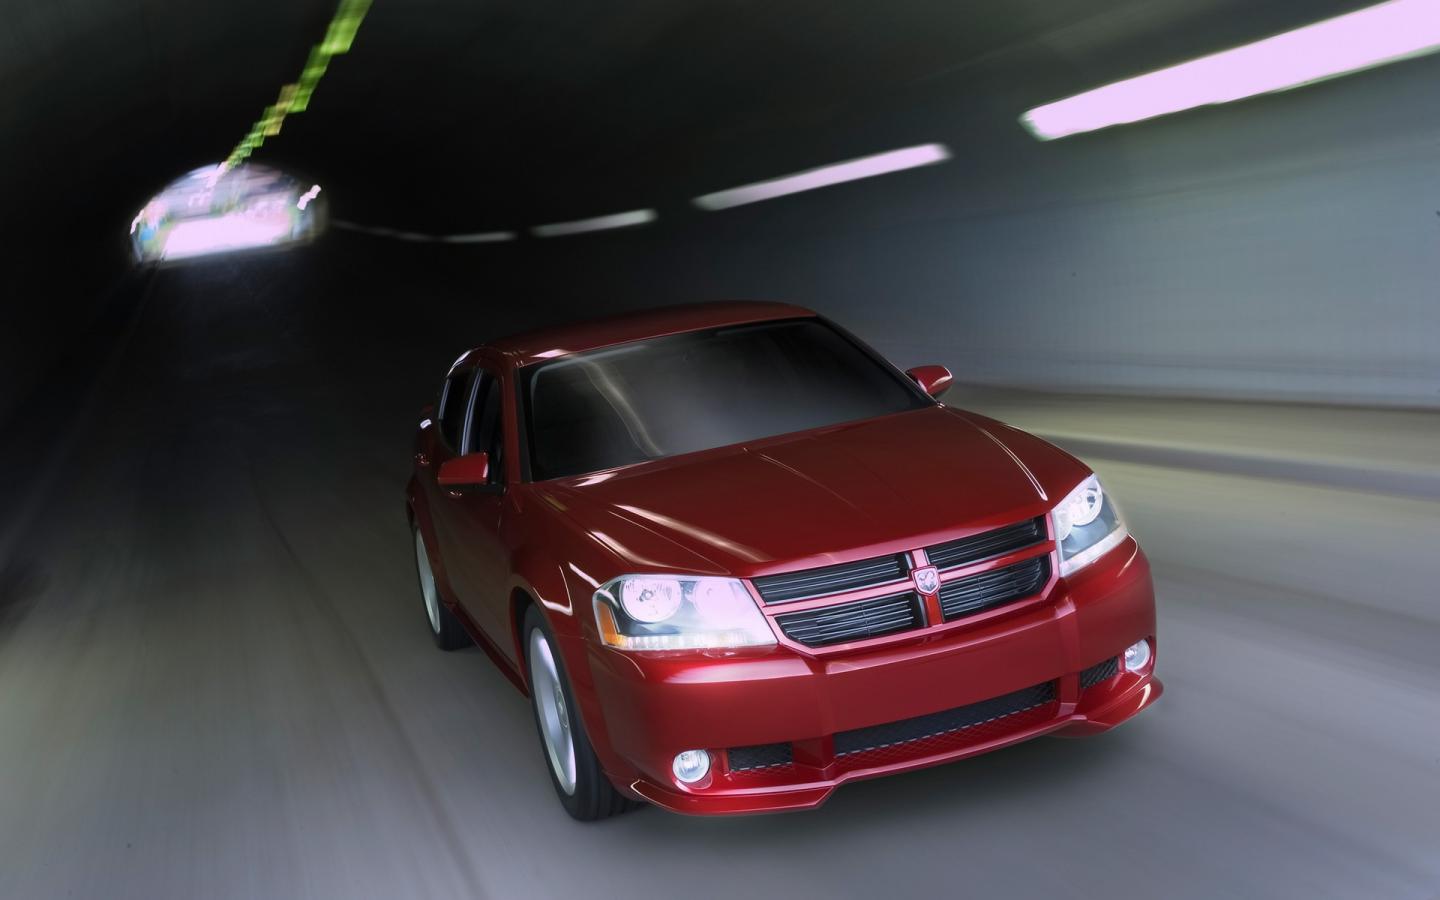 2006 Dodge Avenger Concept Front Angle Drive 1440x900